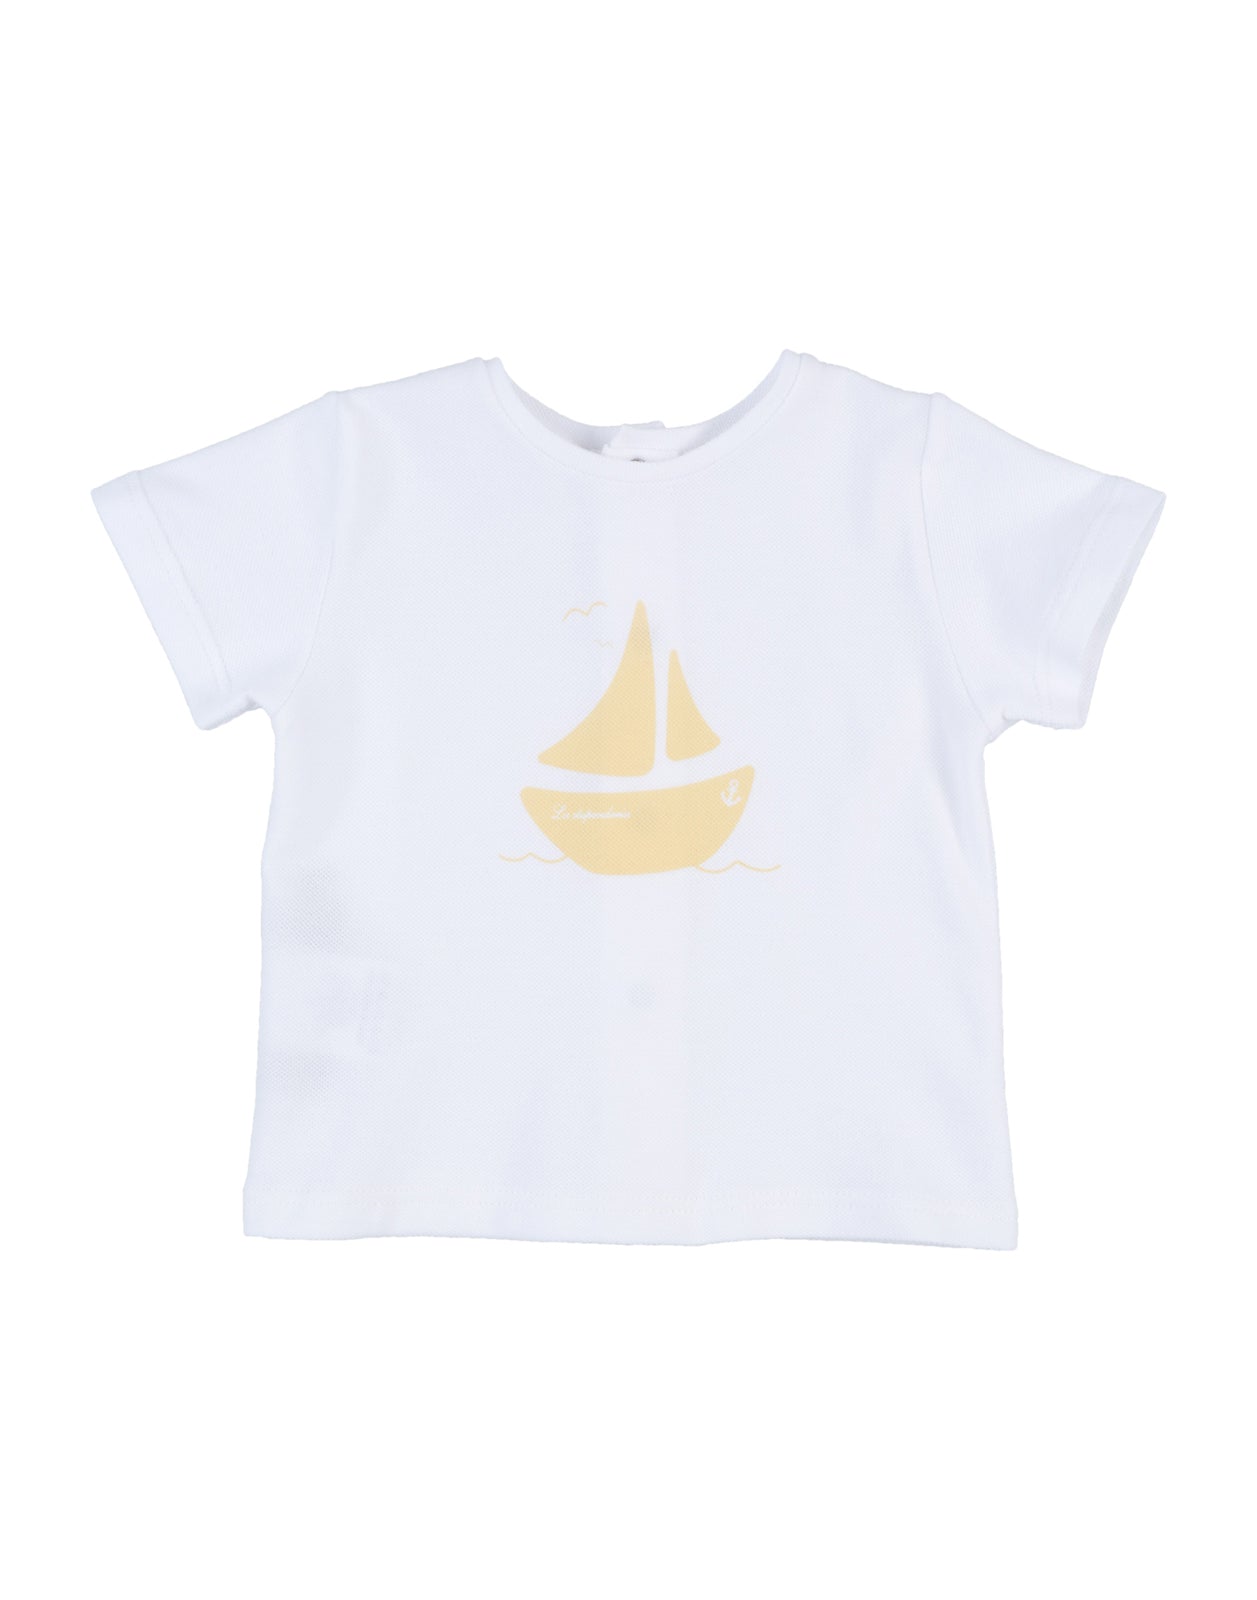 LA STUPENDERIA Pique T-Shirt Top Size 12M Printed Boat Popper Back Made in Italy gallery main photo